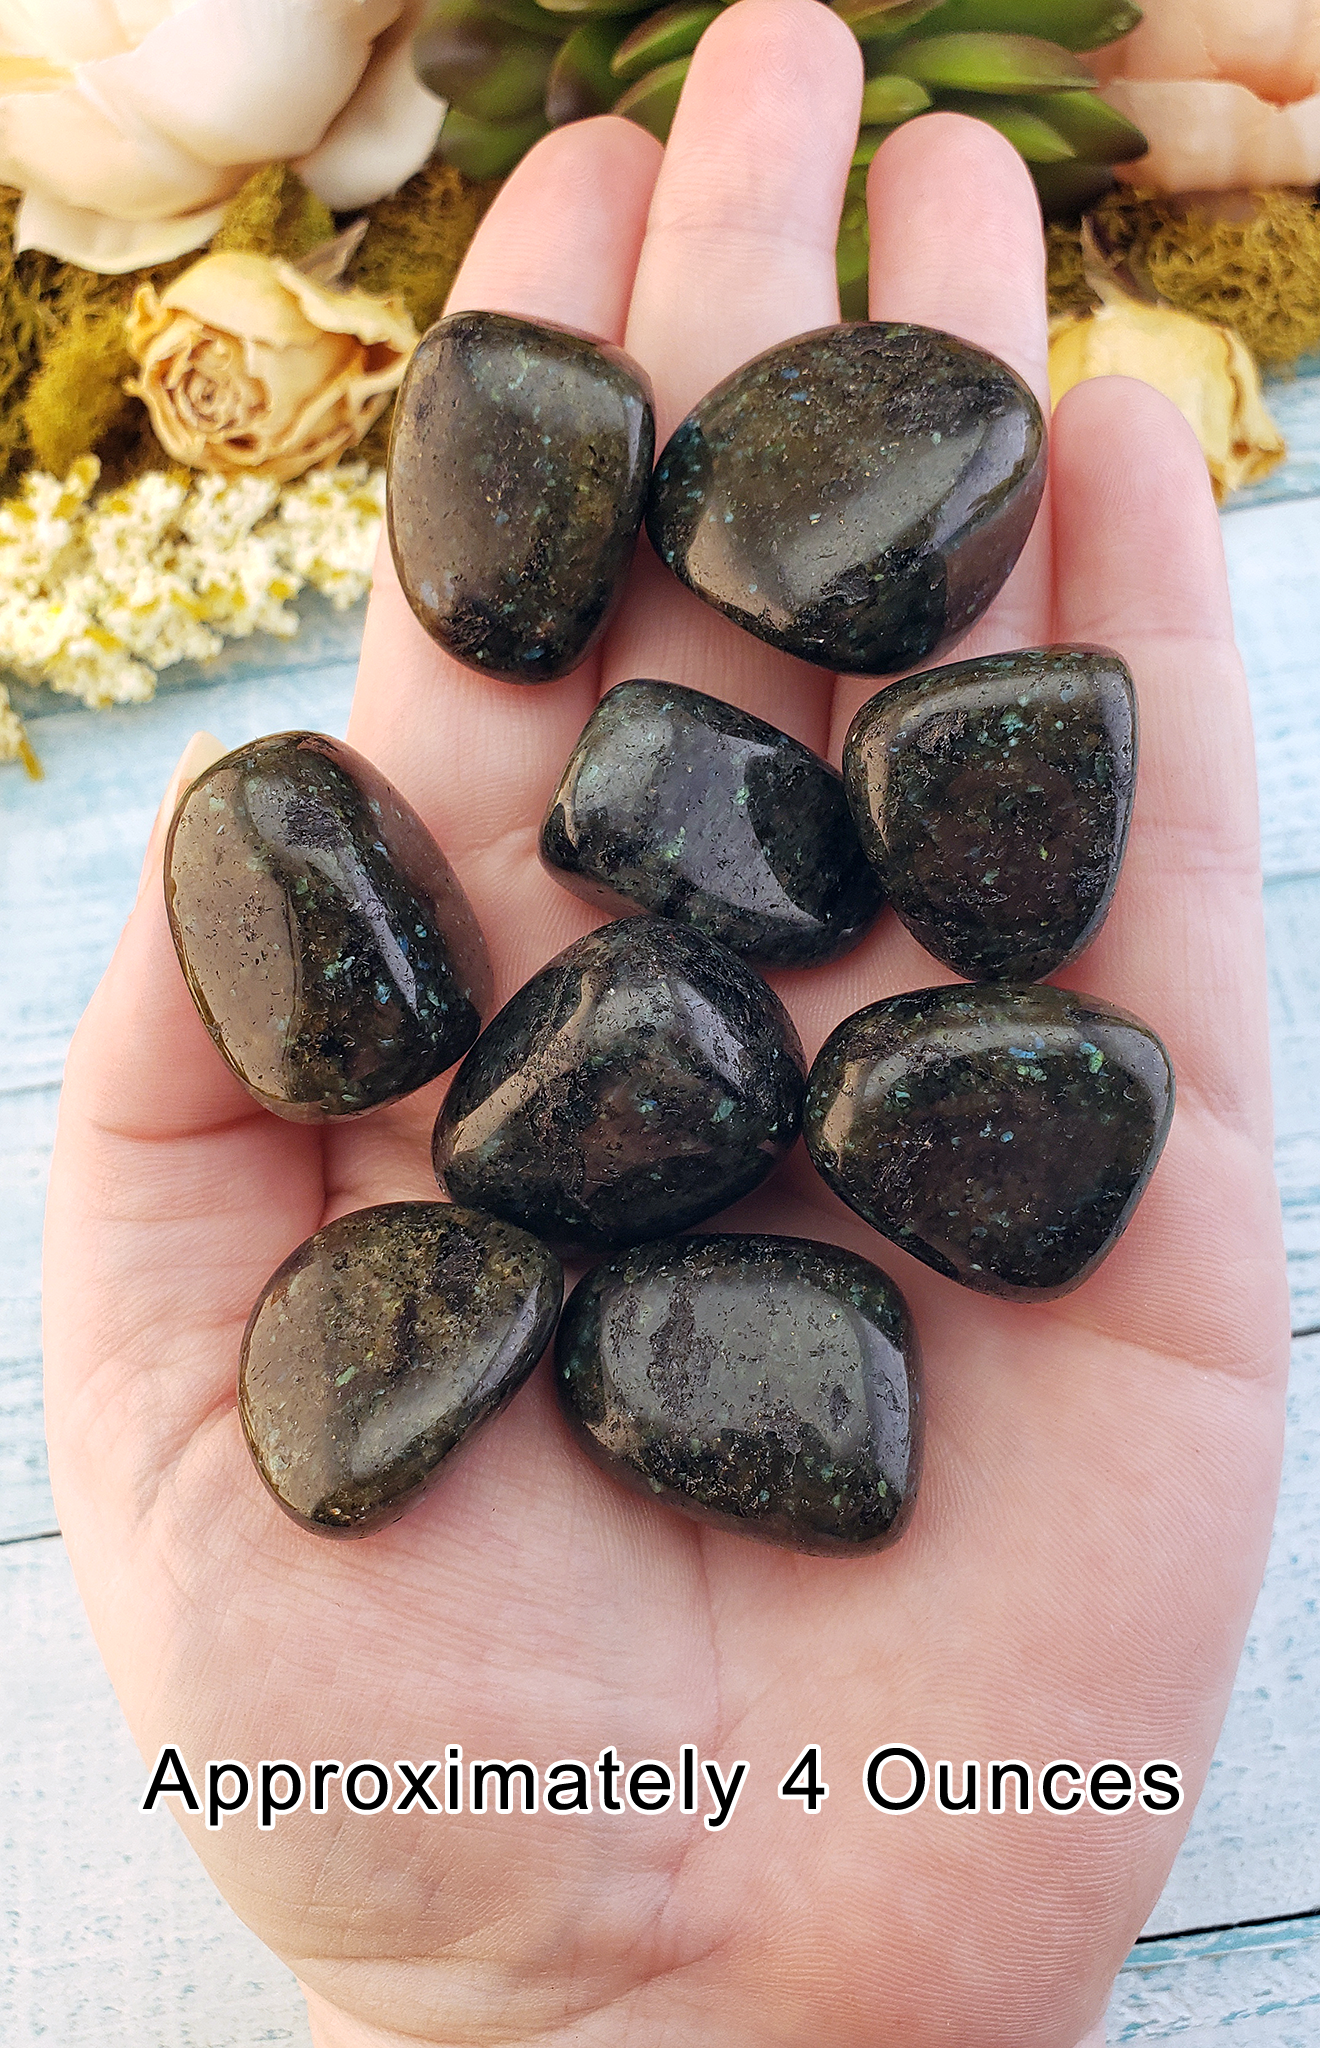 Micro Labradorite Tumbled Polished Natural Gemstone - 4 Ounces in Hand